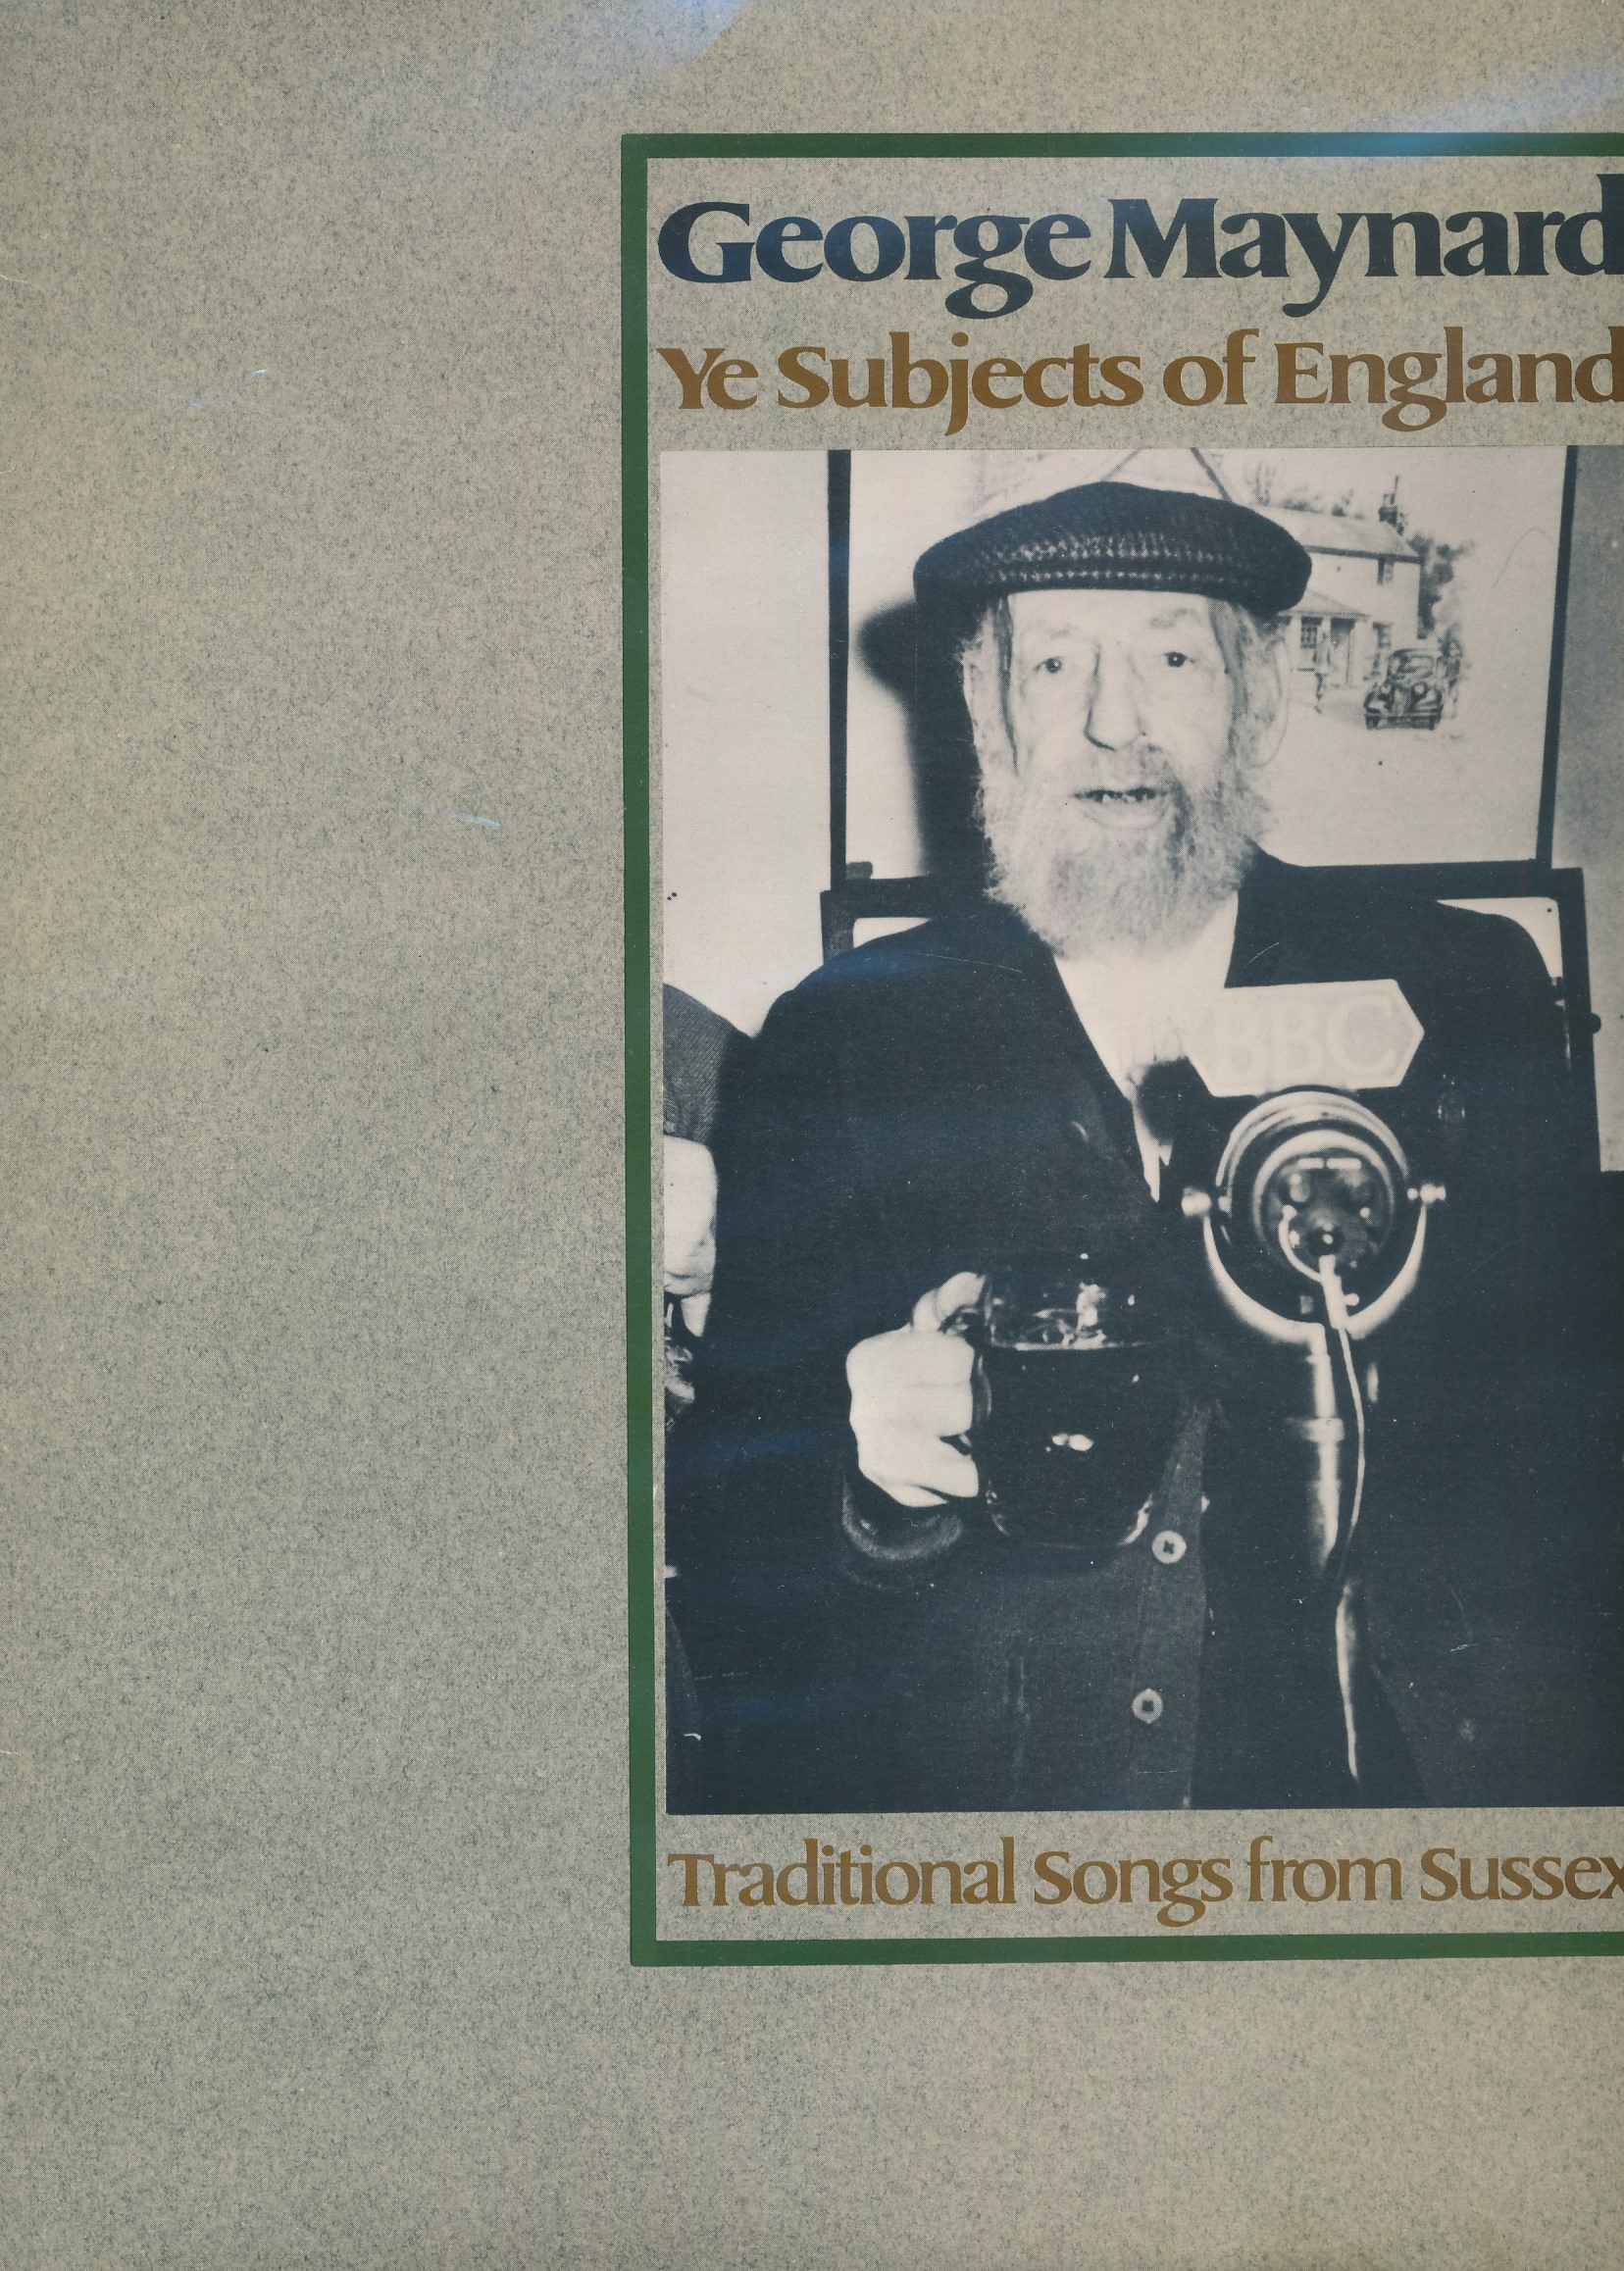 Ye Subjects of England.Traditional Songs From Sussex. Topic 12T 286 Mono